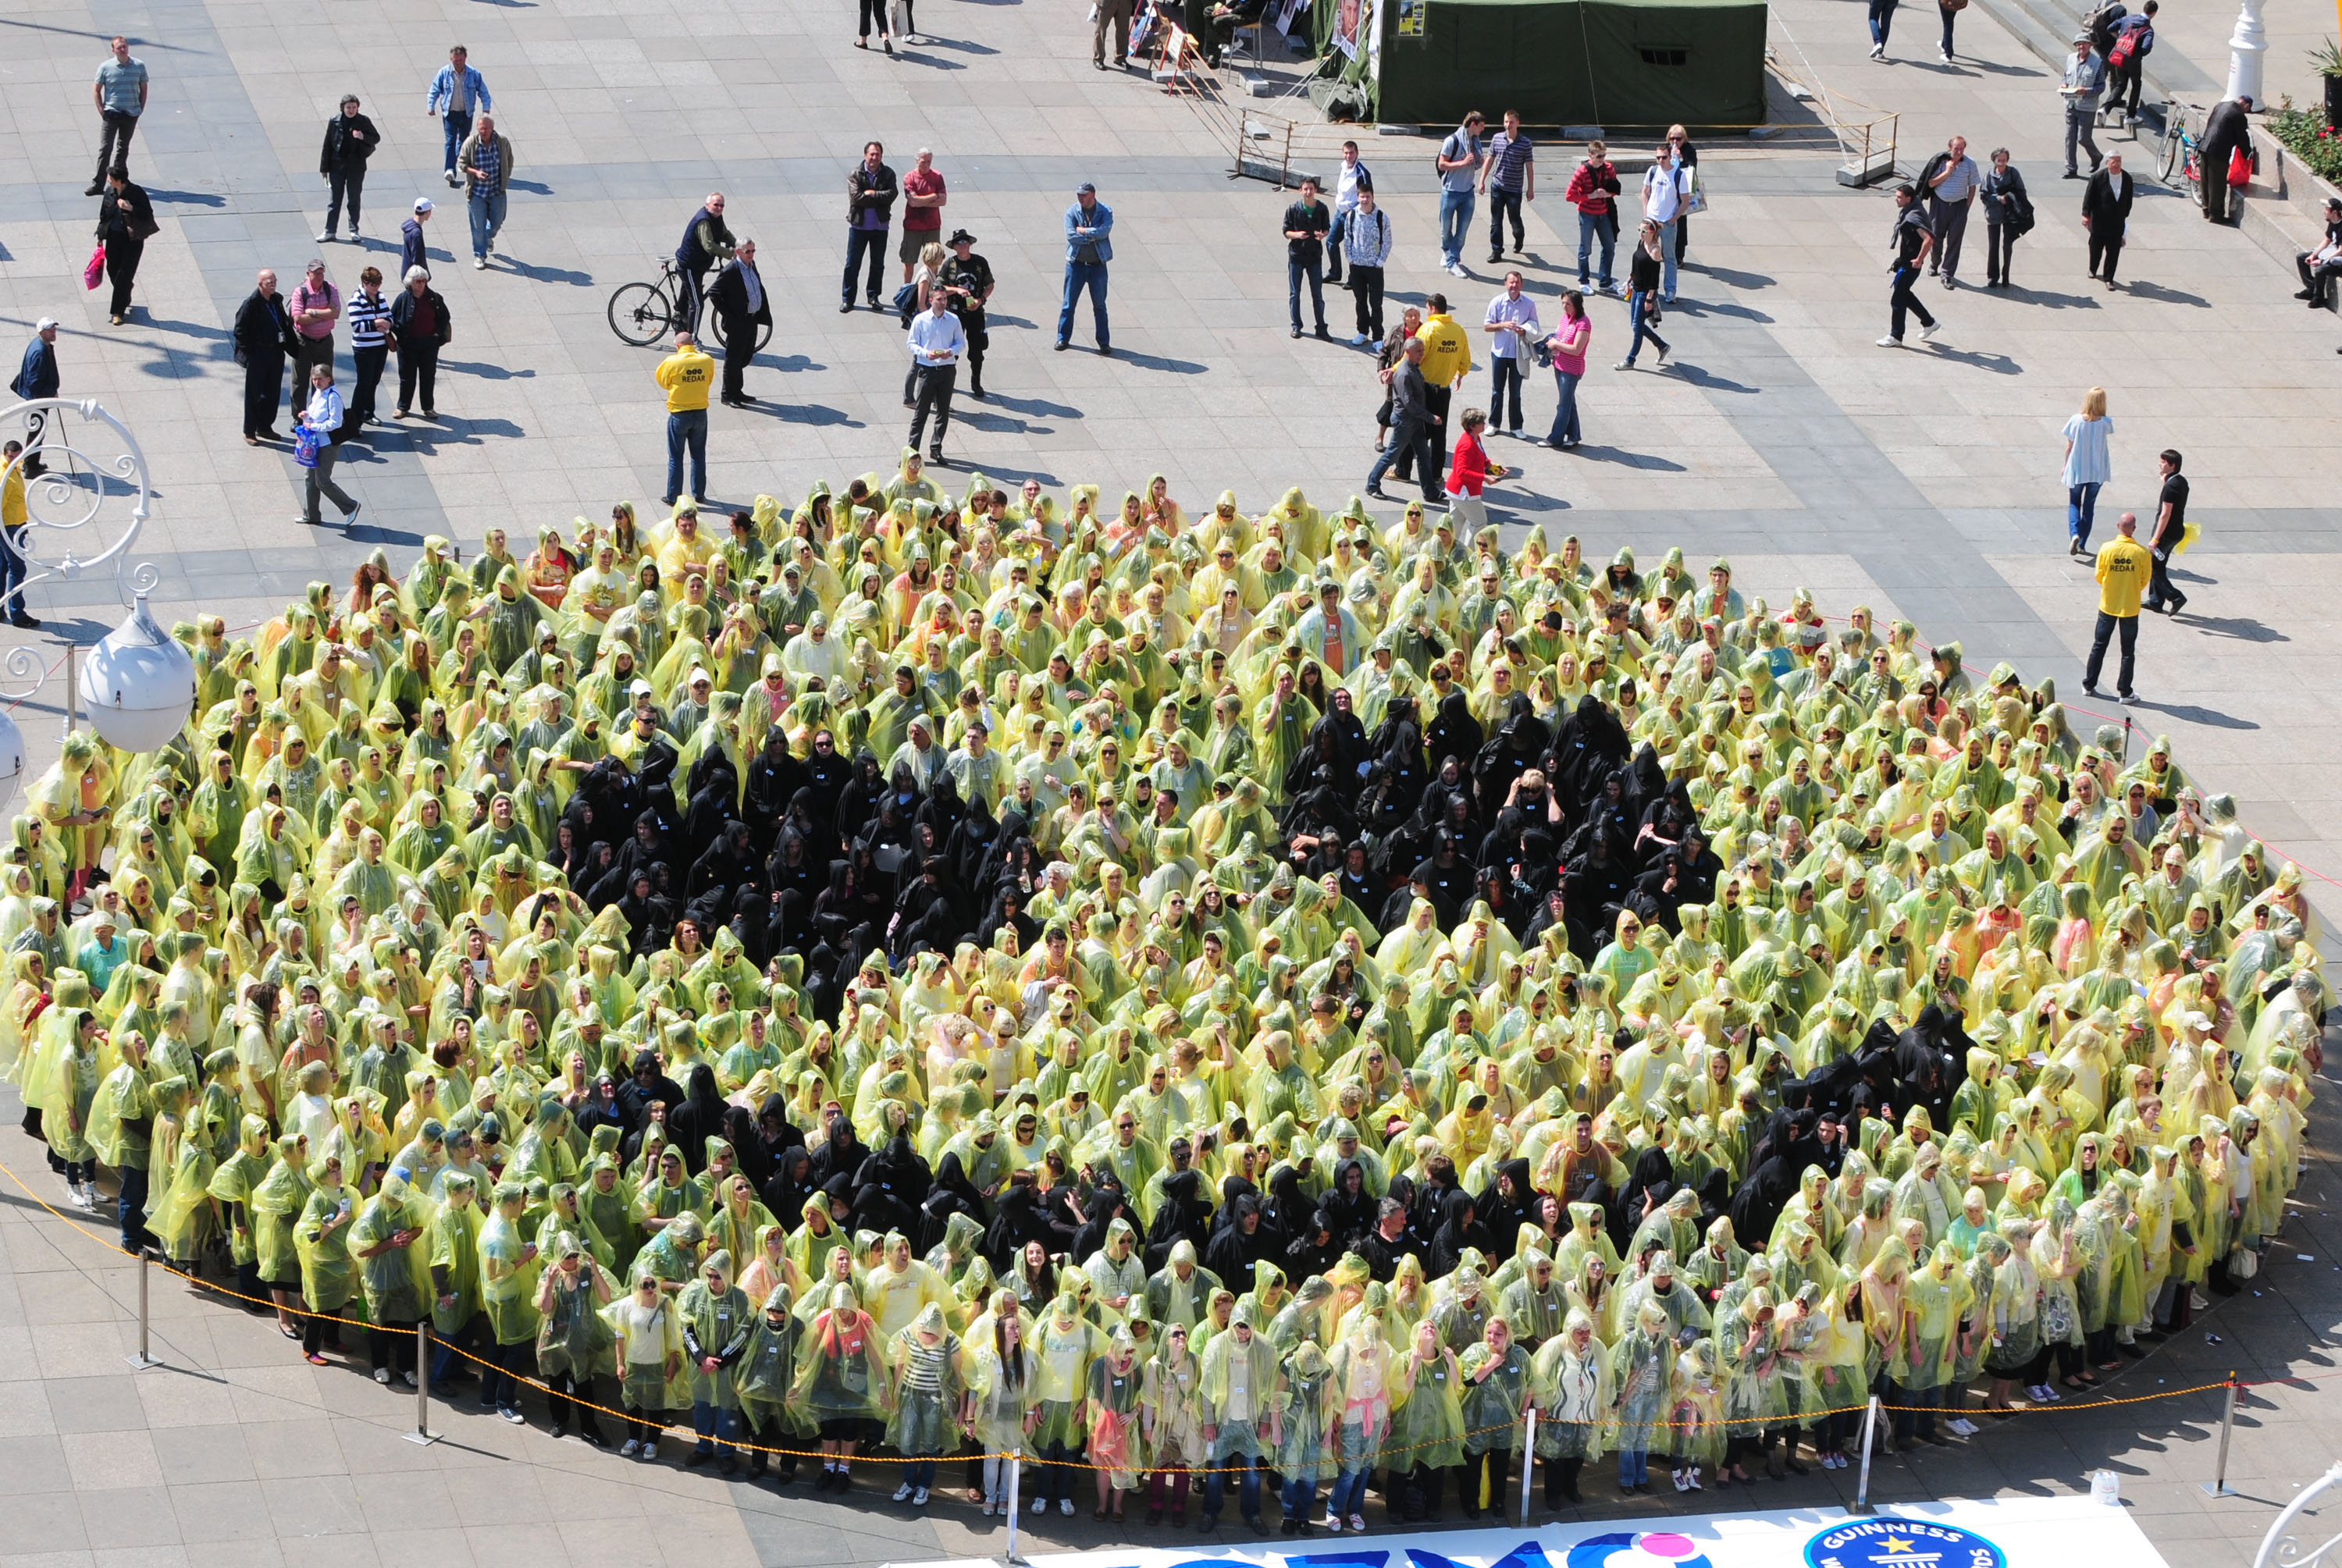 Smile, Croatians break the world record for biggest human smiley